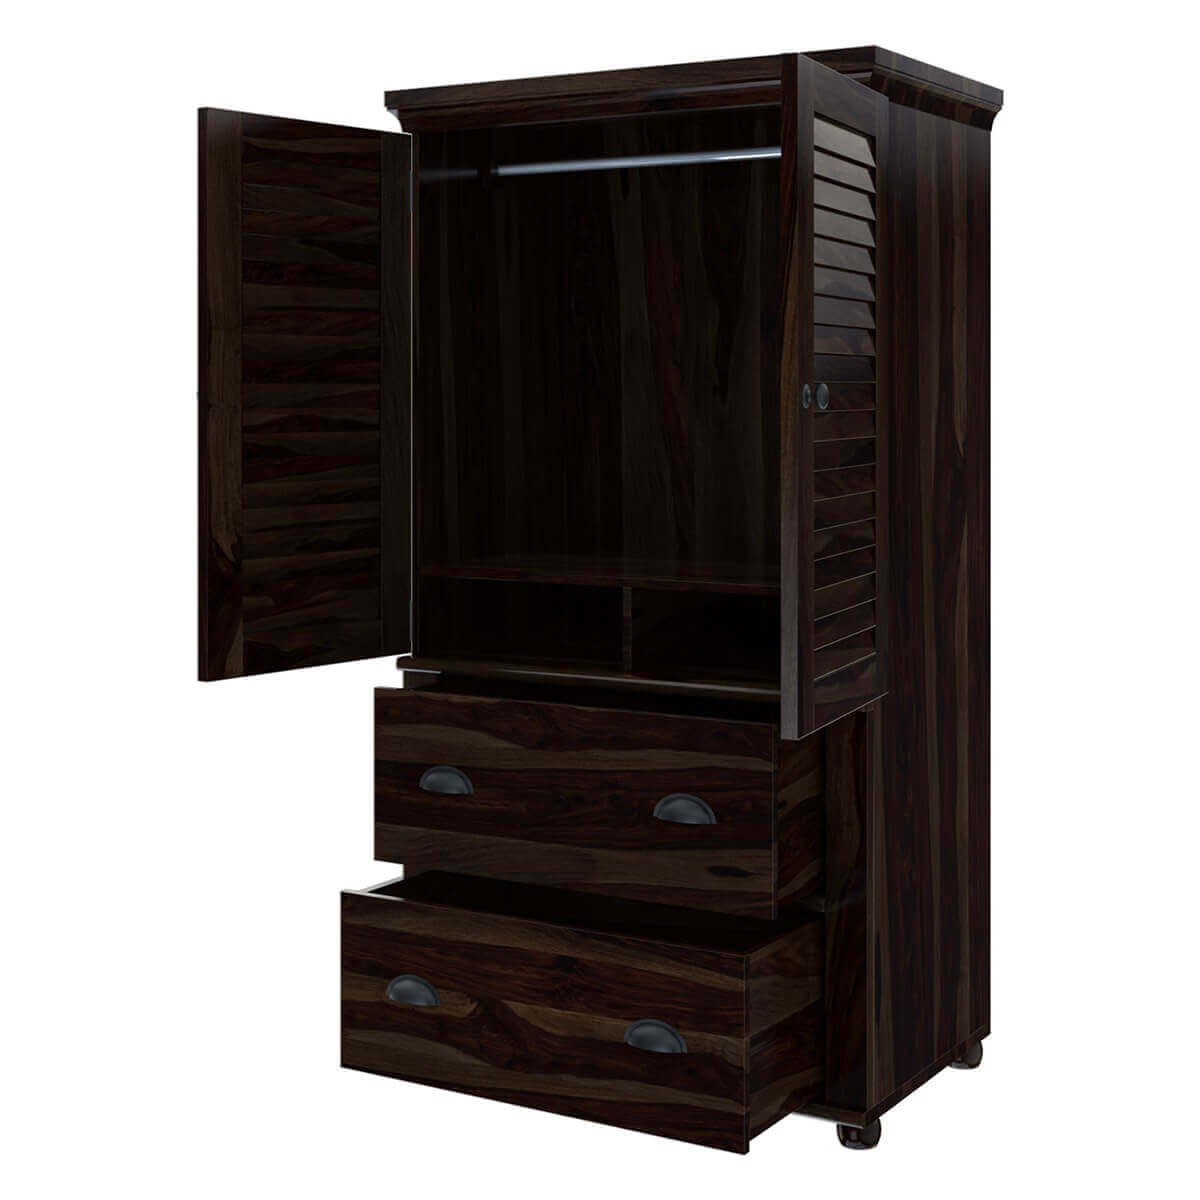 Indiana rustic solid wood wardrobe armoire with drawers